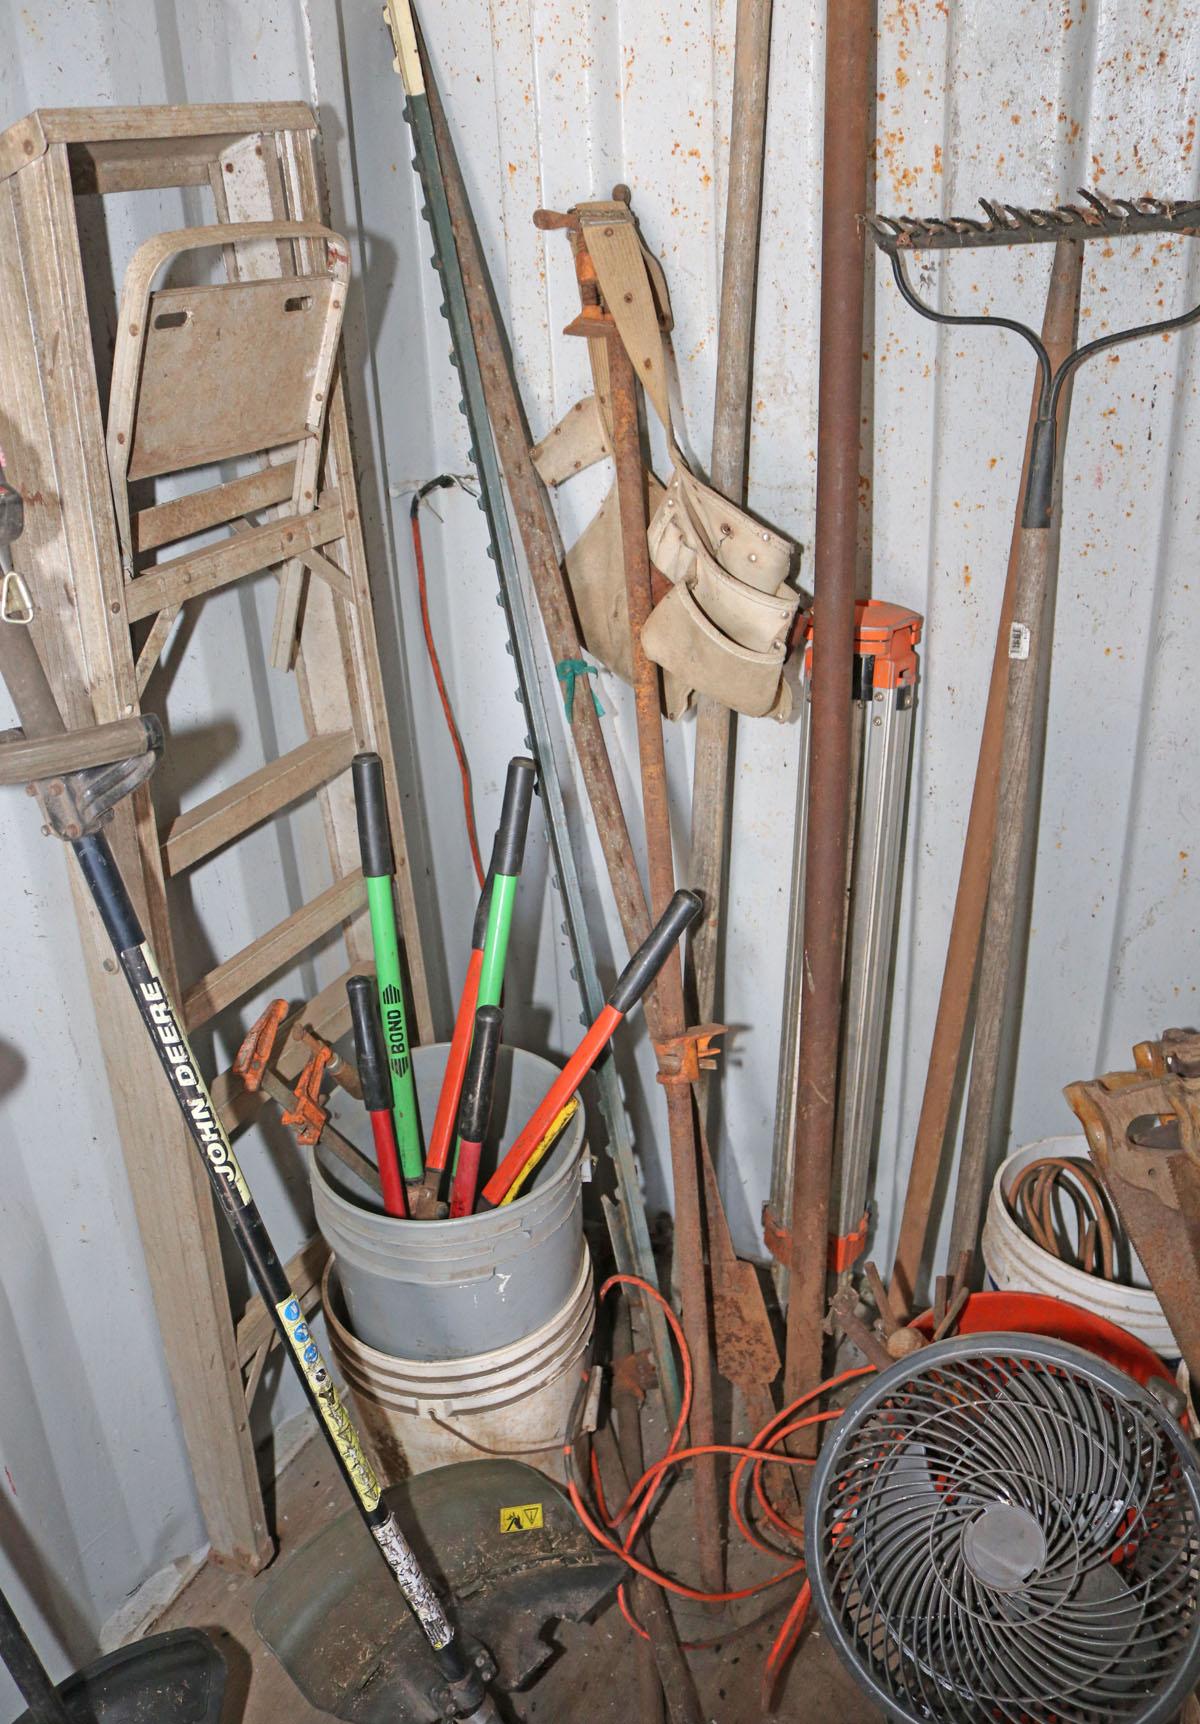 Tools - Bench, Racks:  Contents of Storage Container